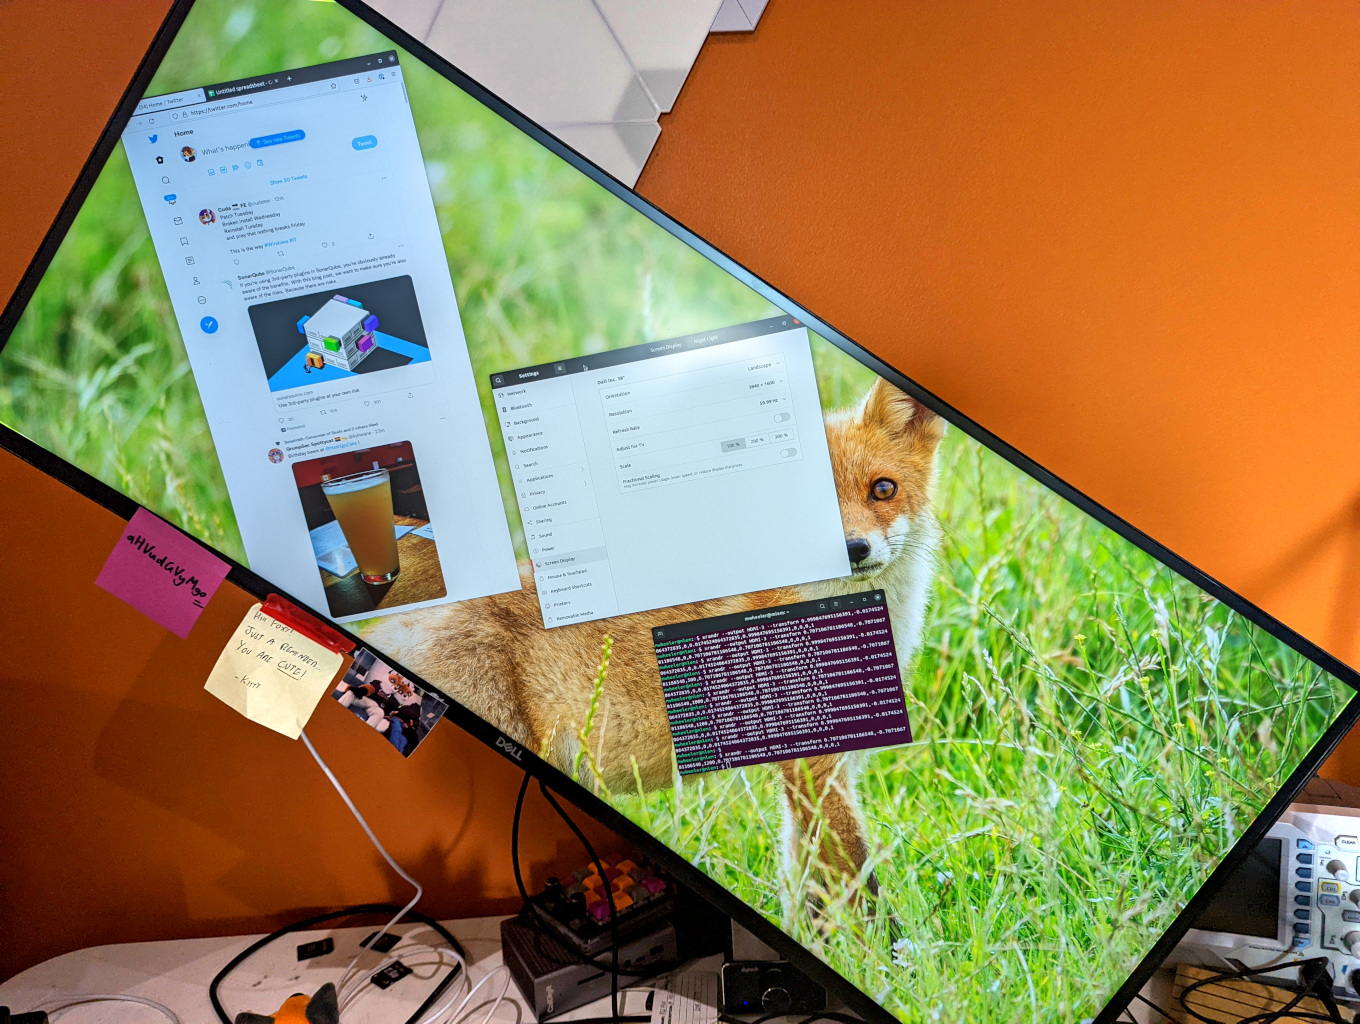 Monitor with a 45 degree rotation